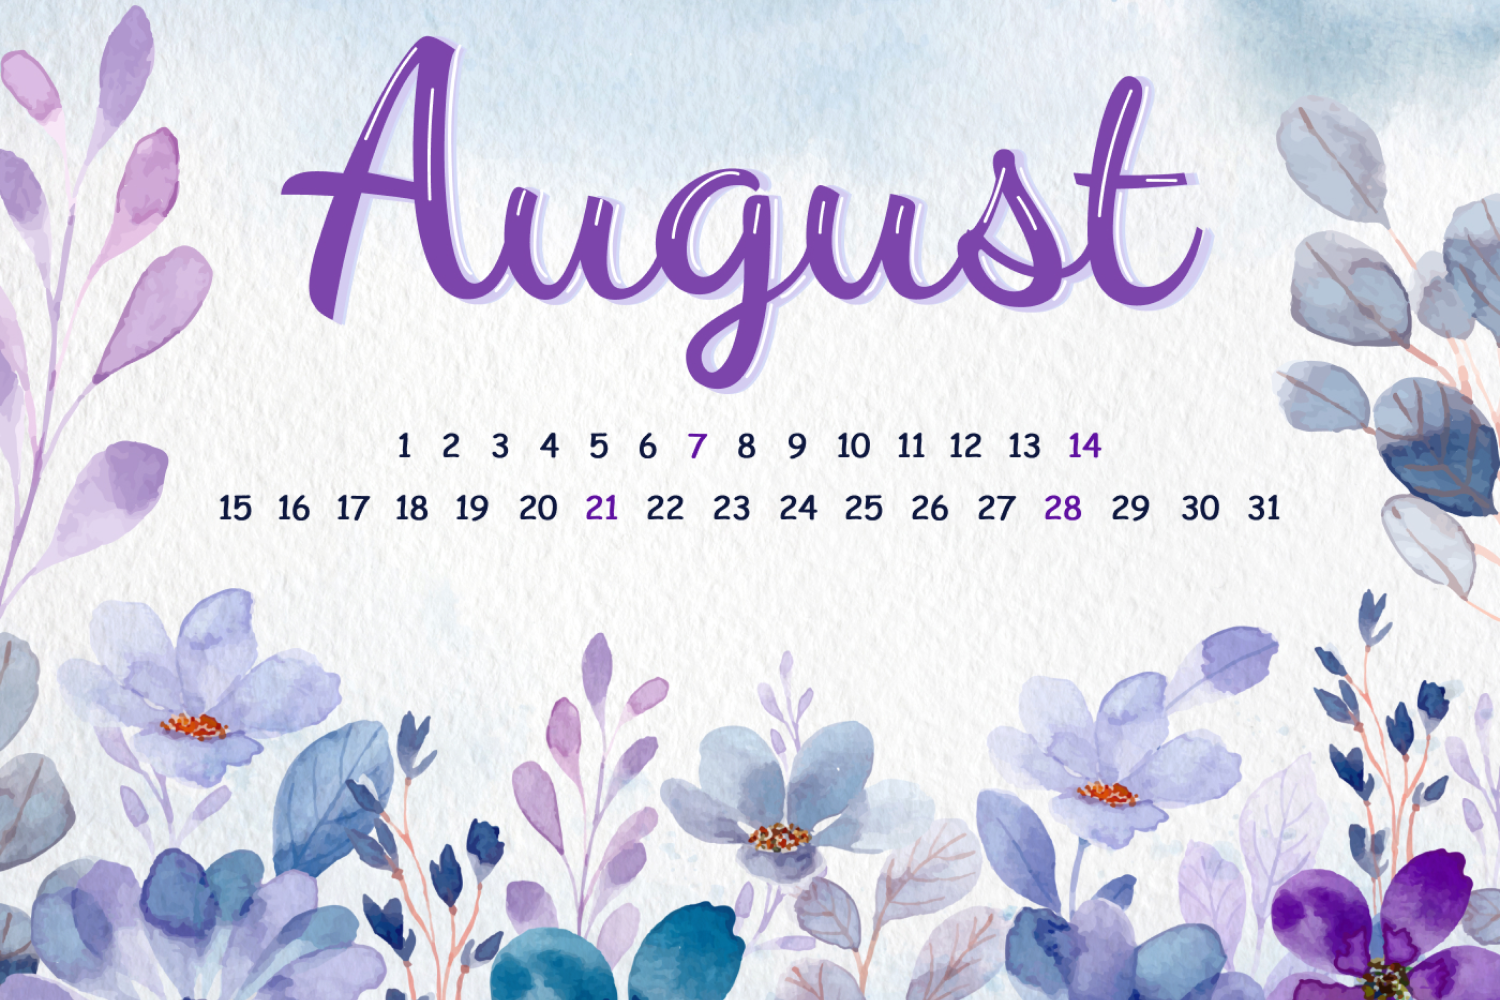 Monthly calendar on purple background with flowers.